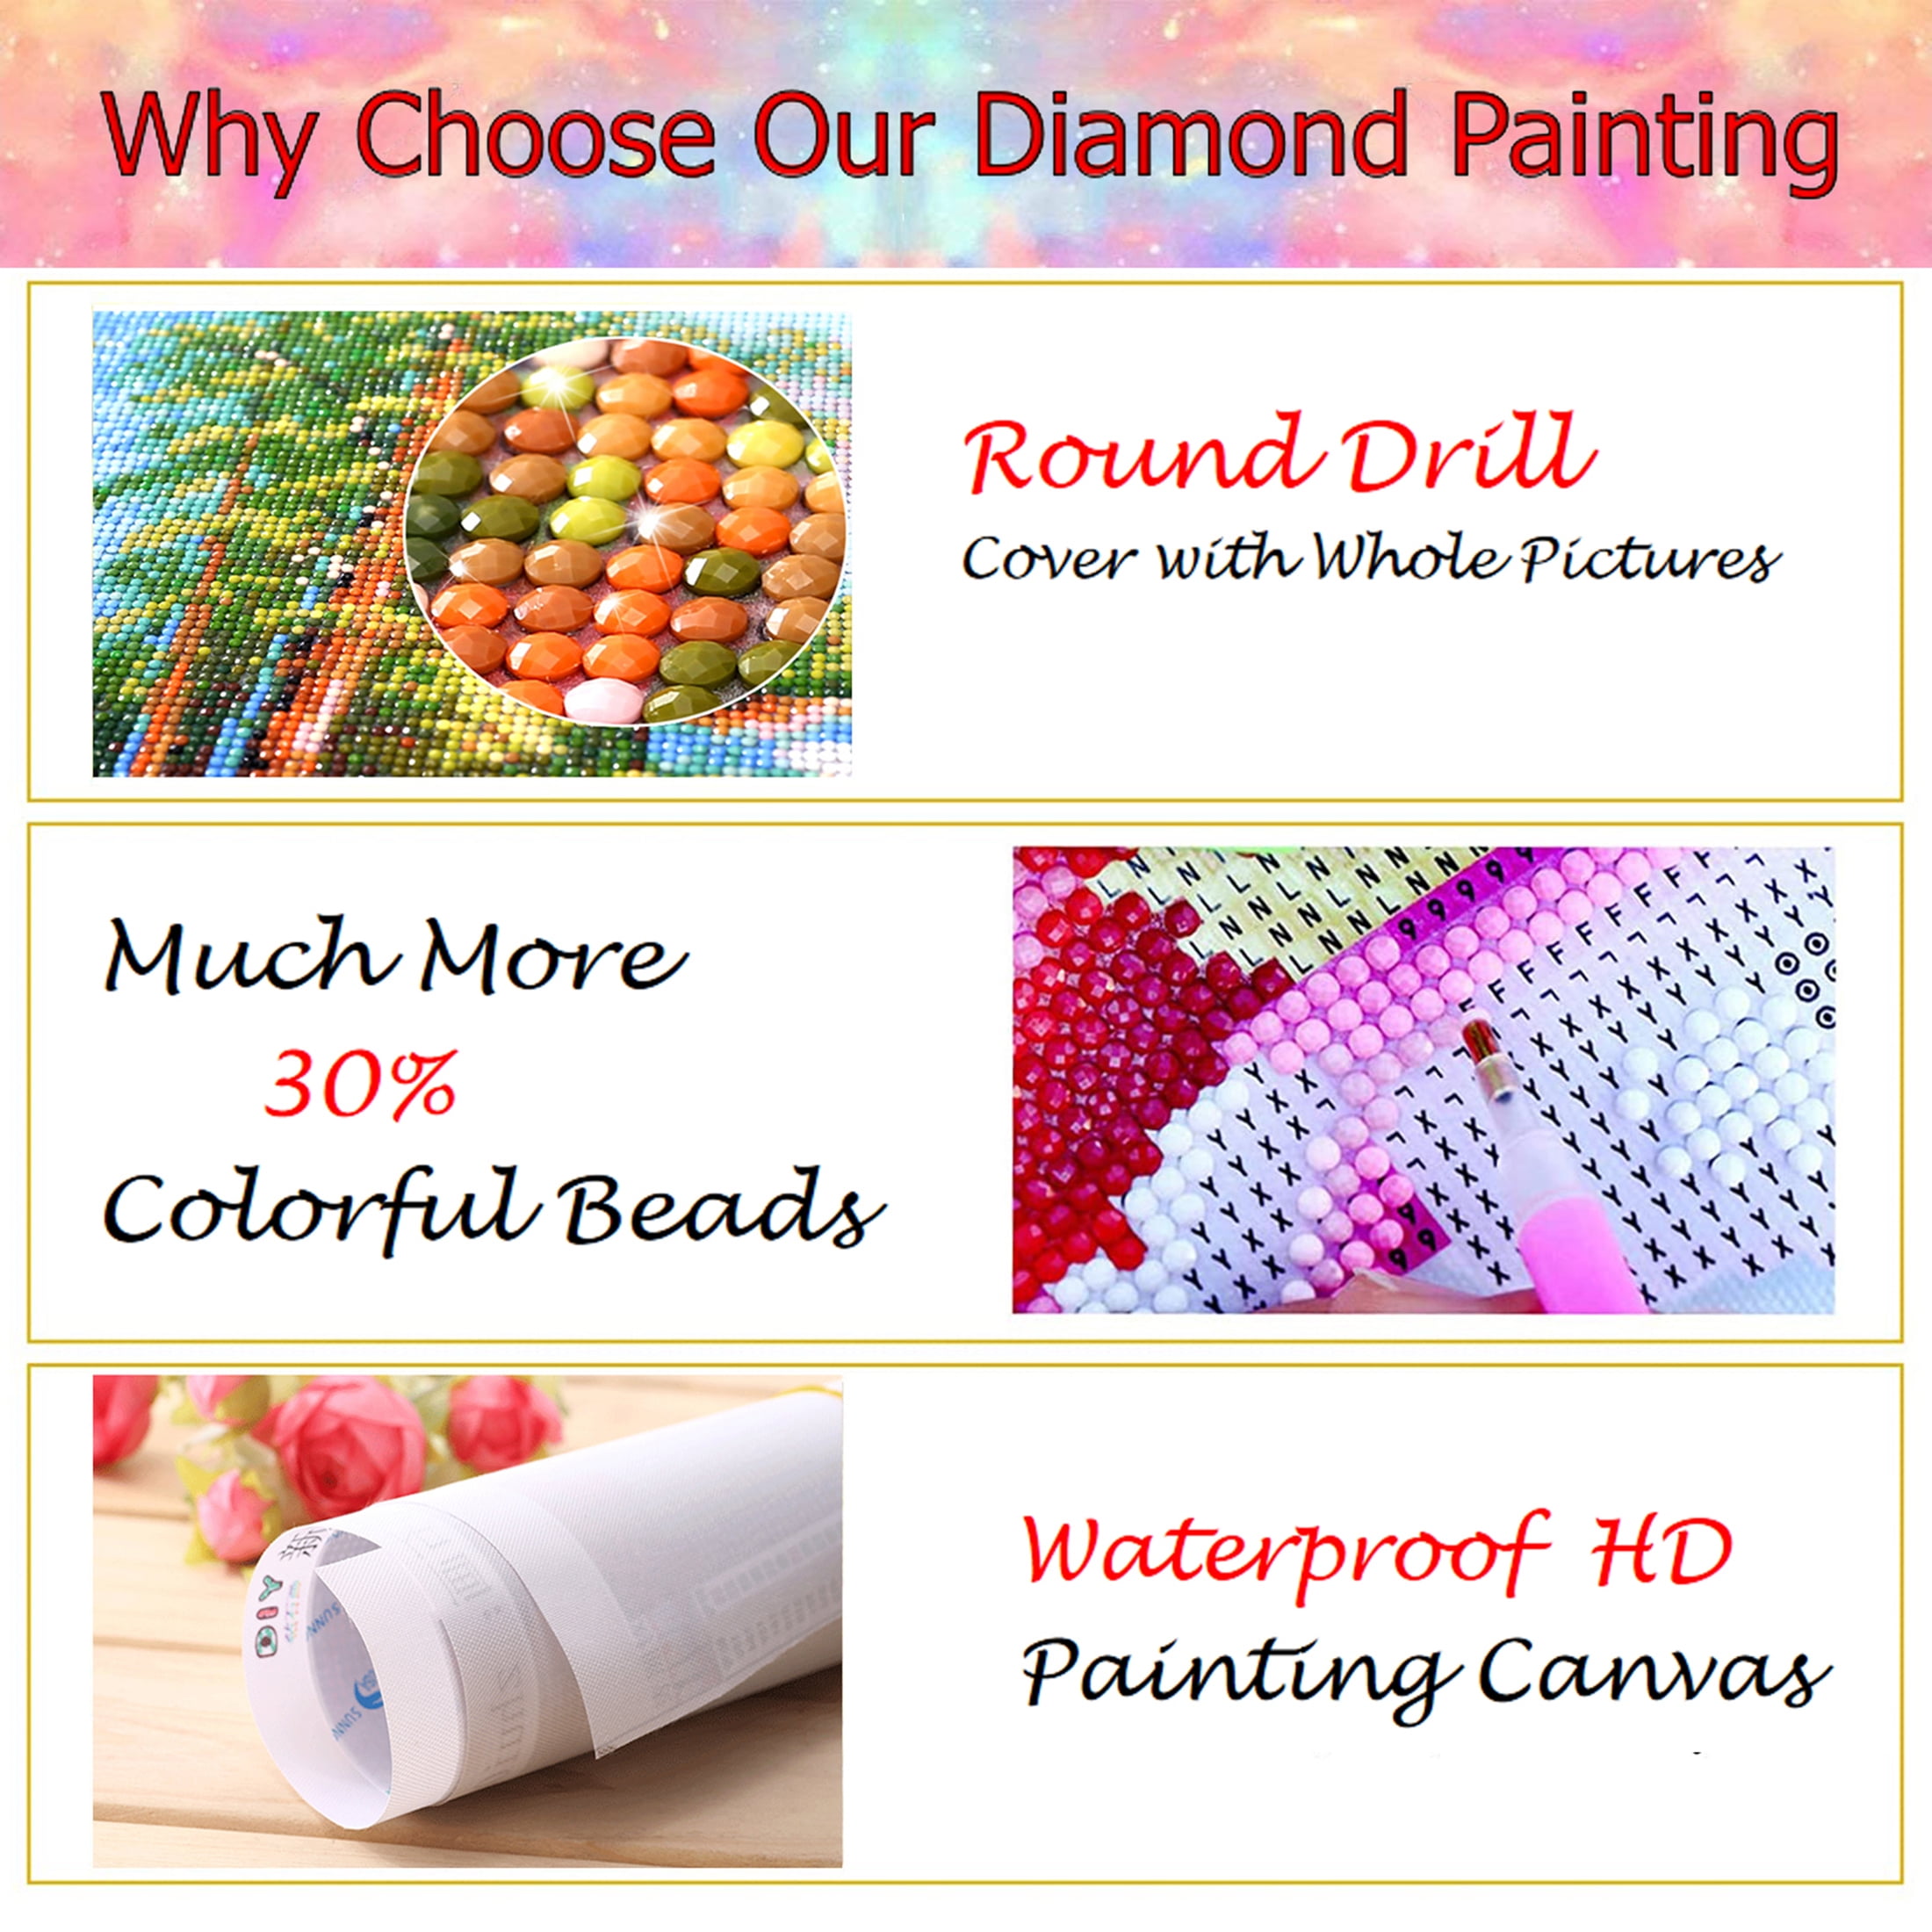 YALKIN 5D Diamond Painting Kits for Adults, DIY Full Round Drill Large  Diamond Art Kits Crystal Rhinestion Arts and Crafts, Gem Arts Paints with